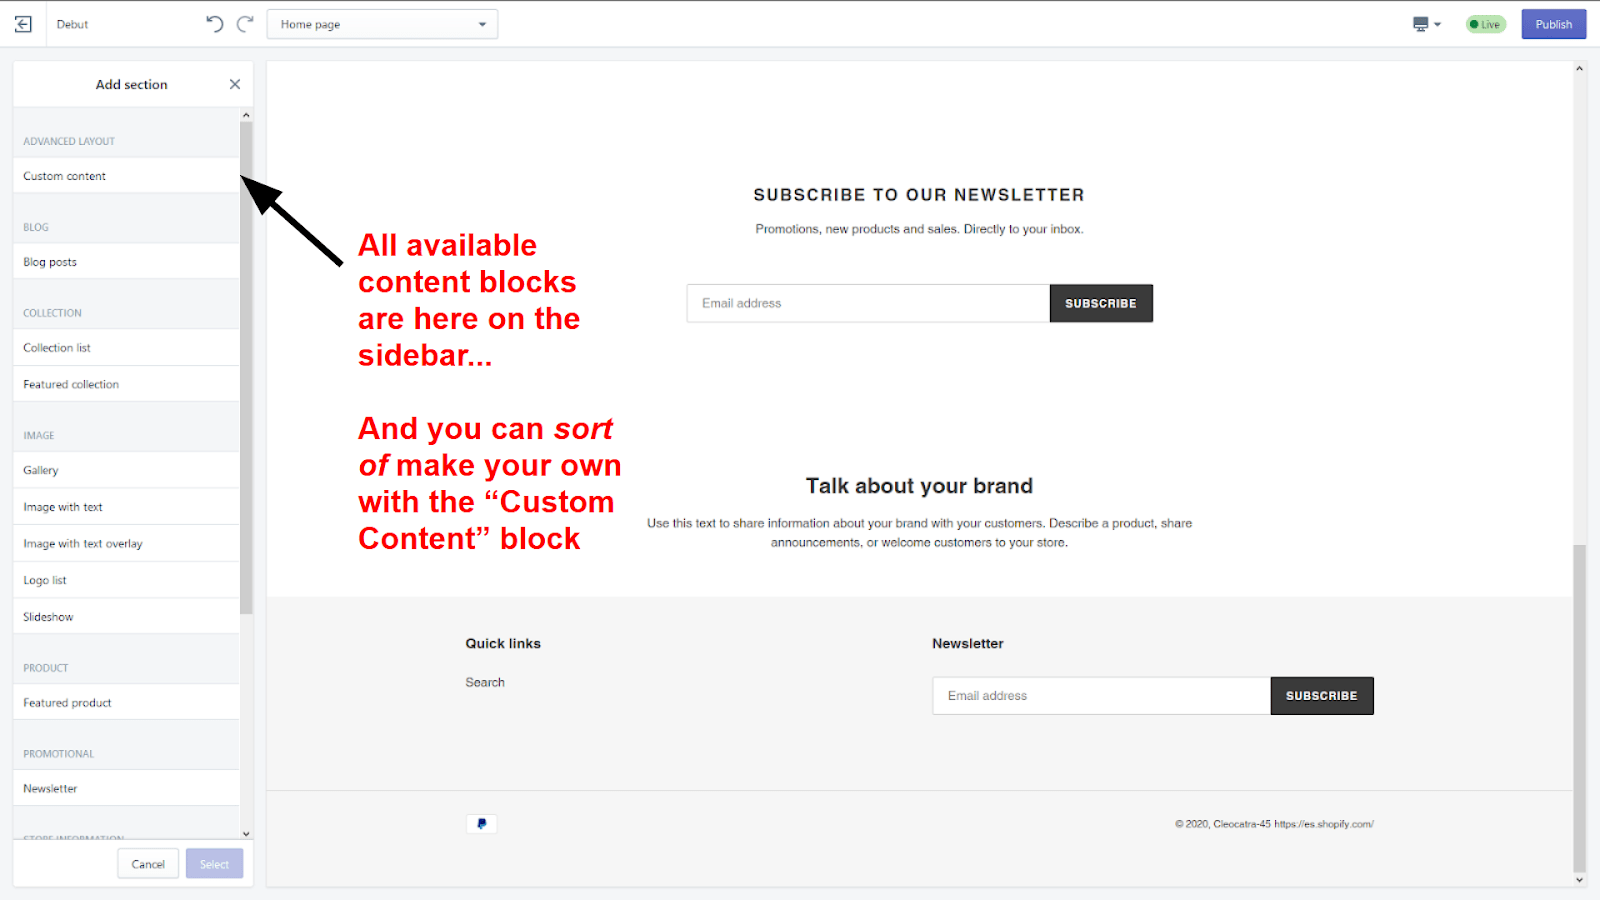 content blocks are all in the sidebar